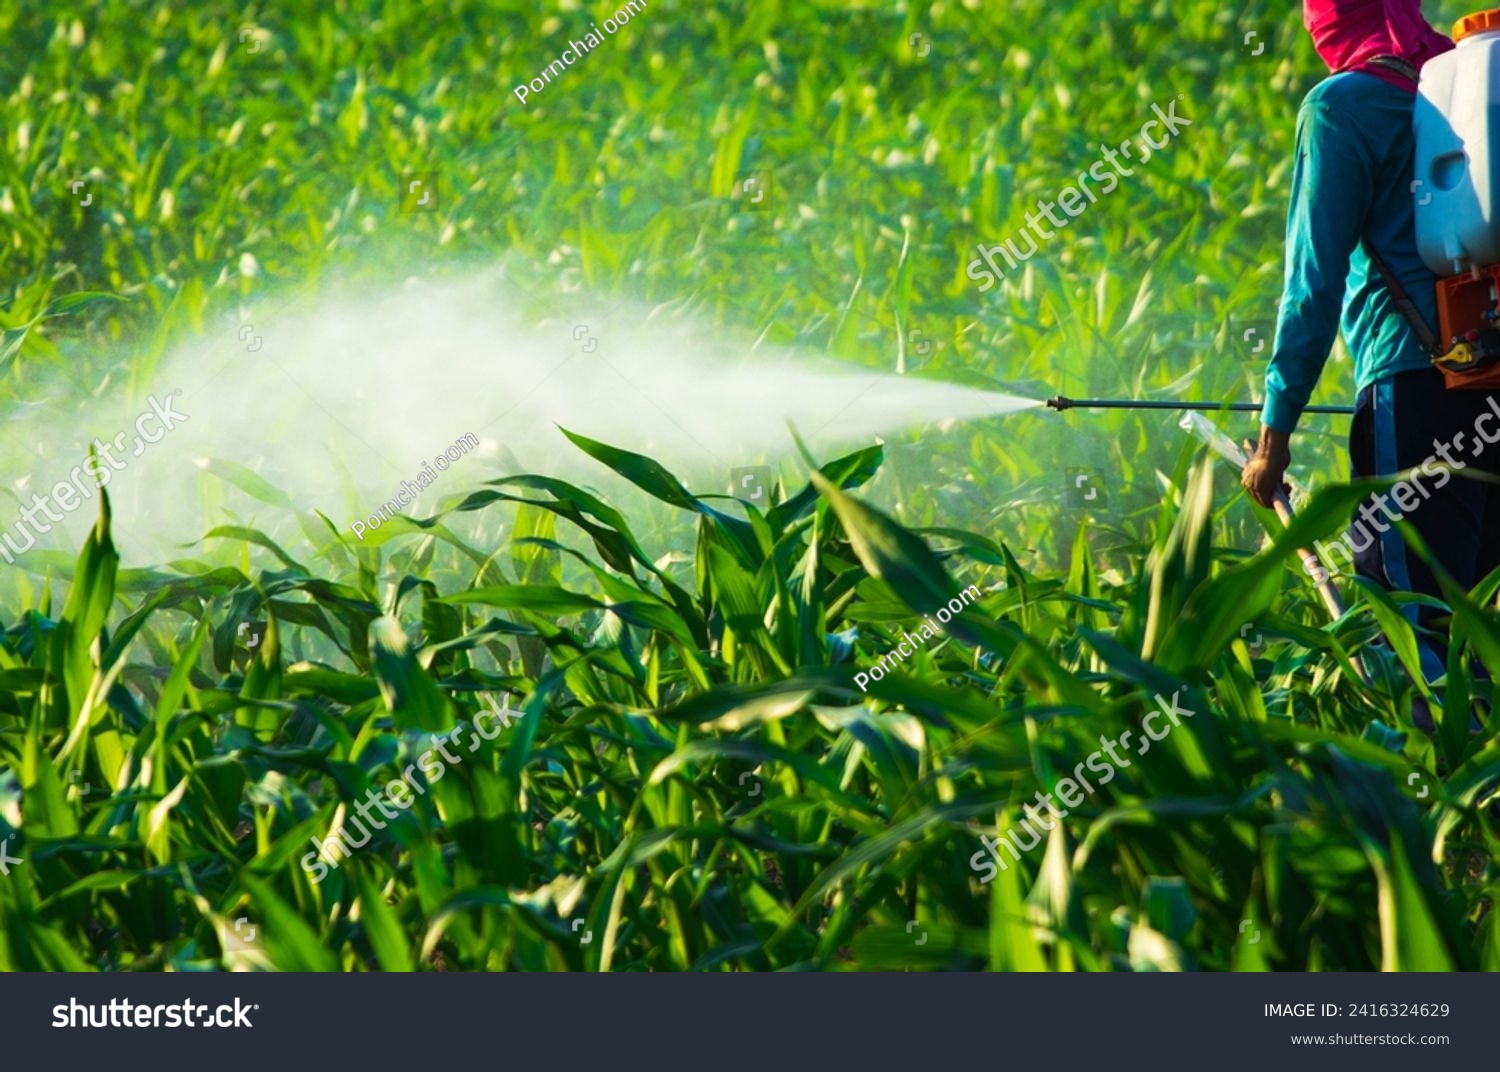 Failure to properly protect chemicals while spraying causes harm to the body, causing toxic residues that cause
Syncope is caused by a lack of oxygen in the body. #2416324629